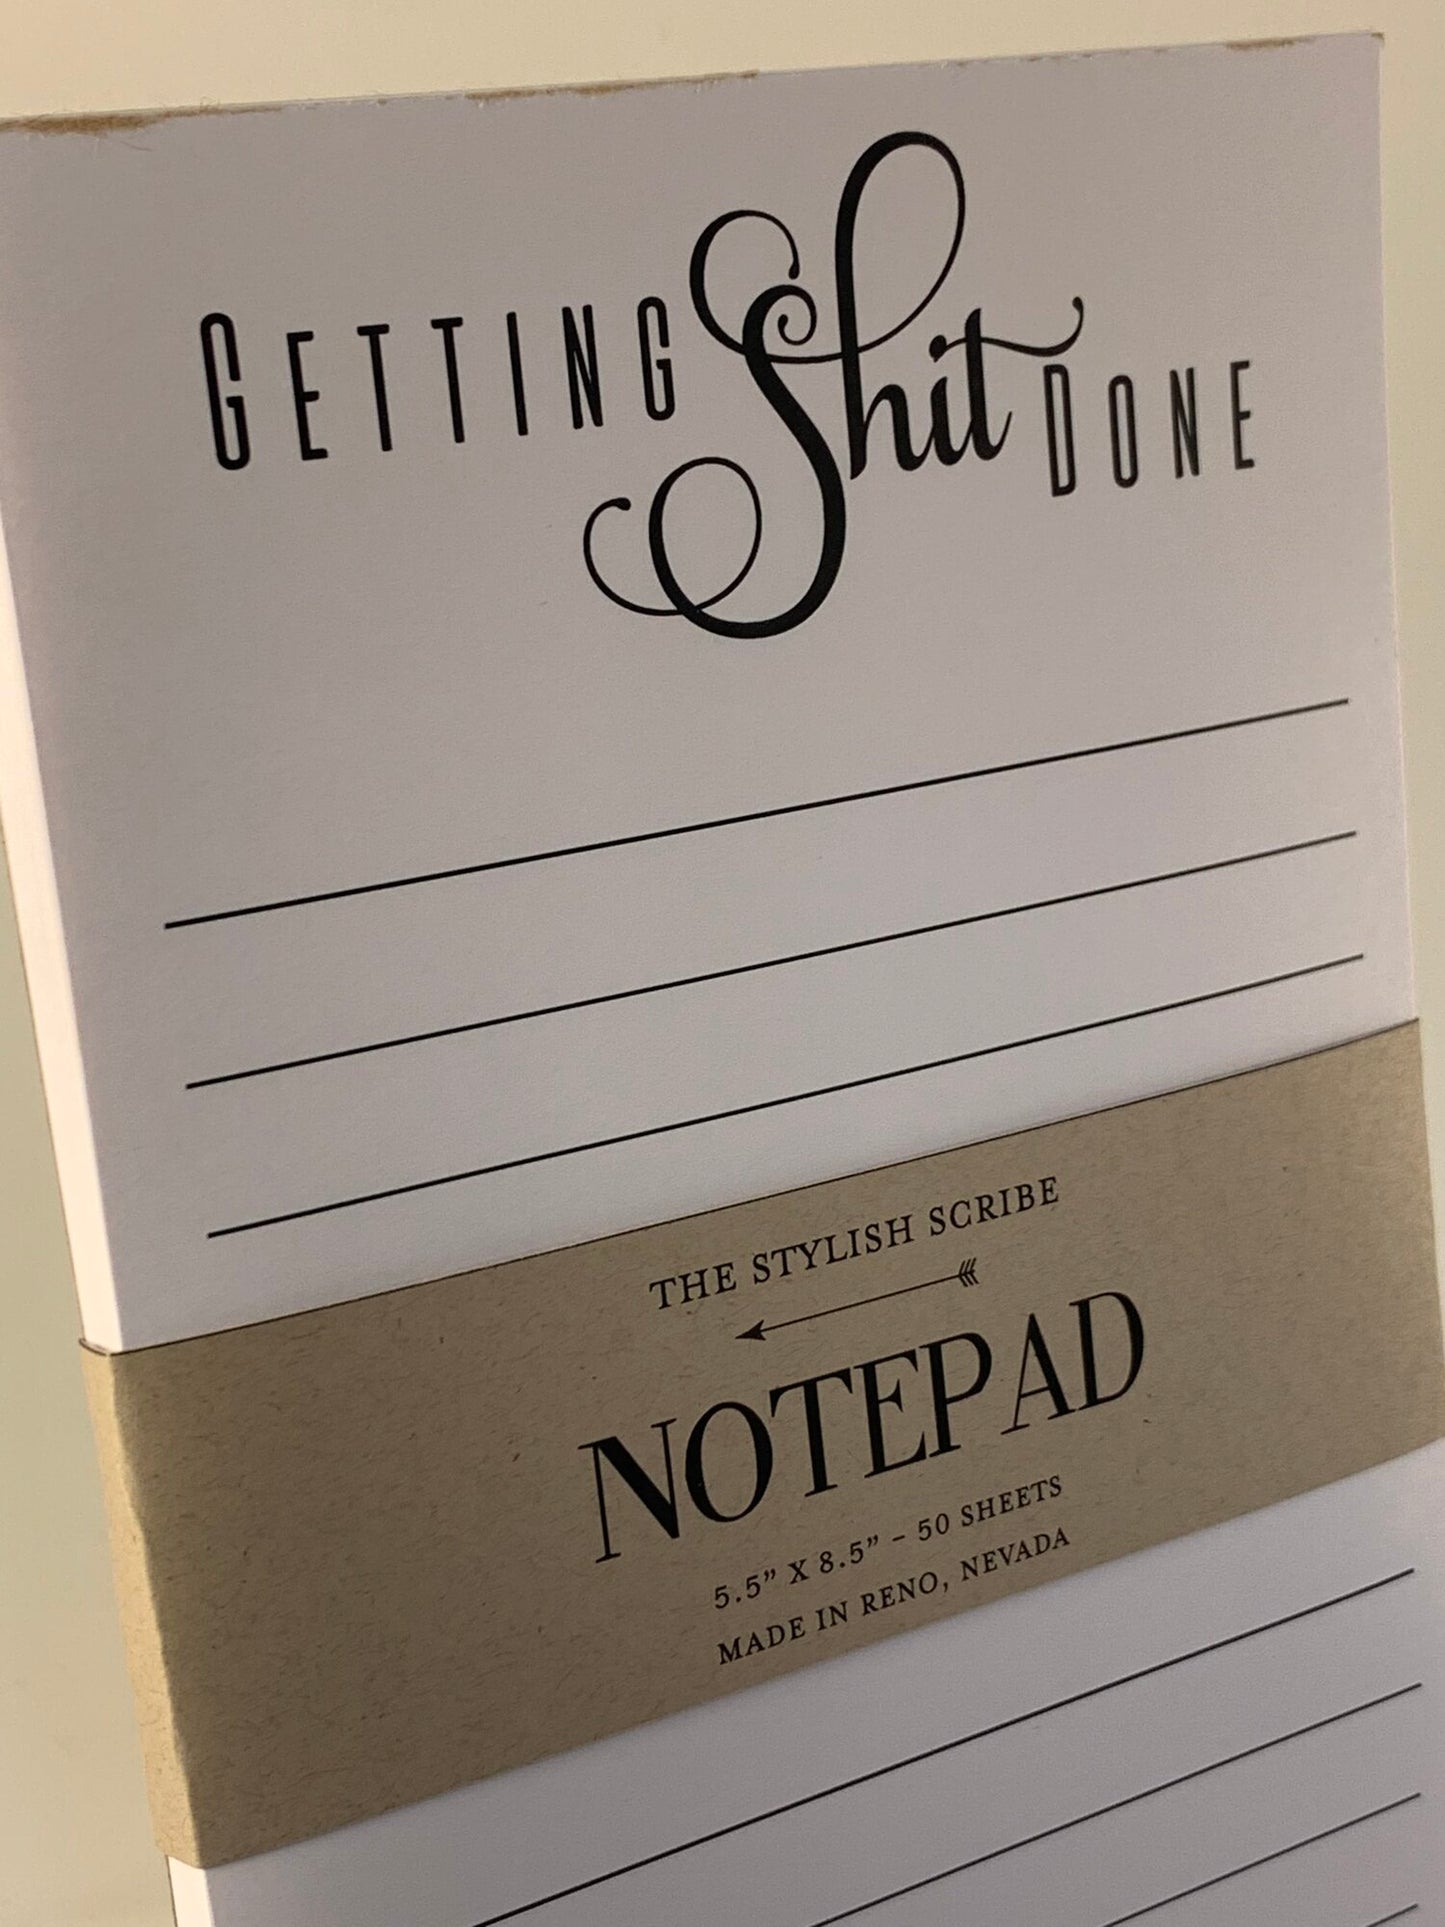 Getting Sh*t Done Notepad